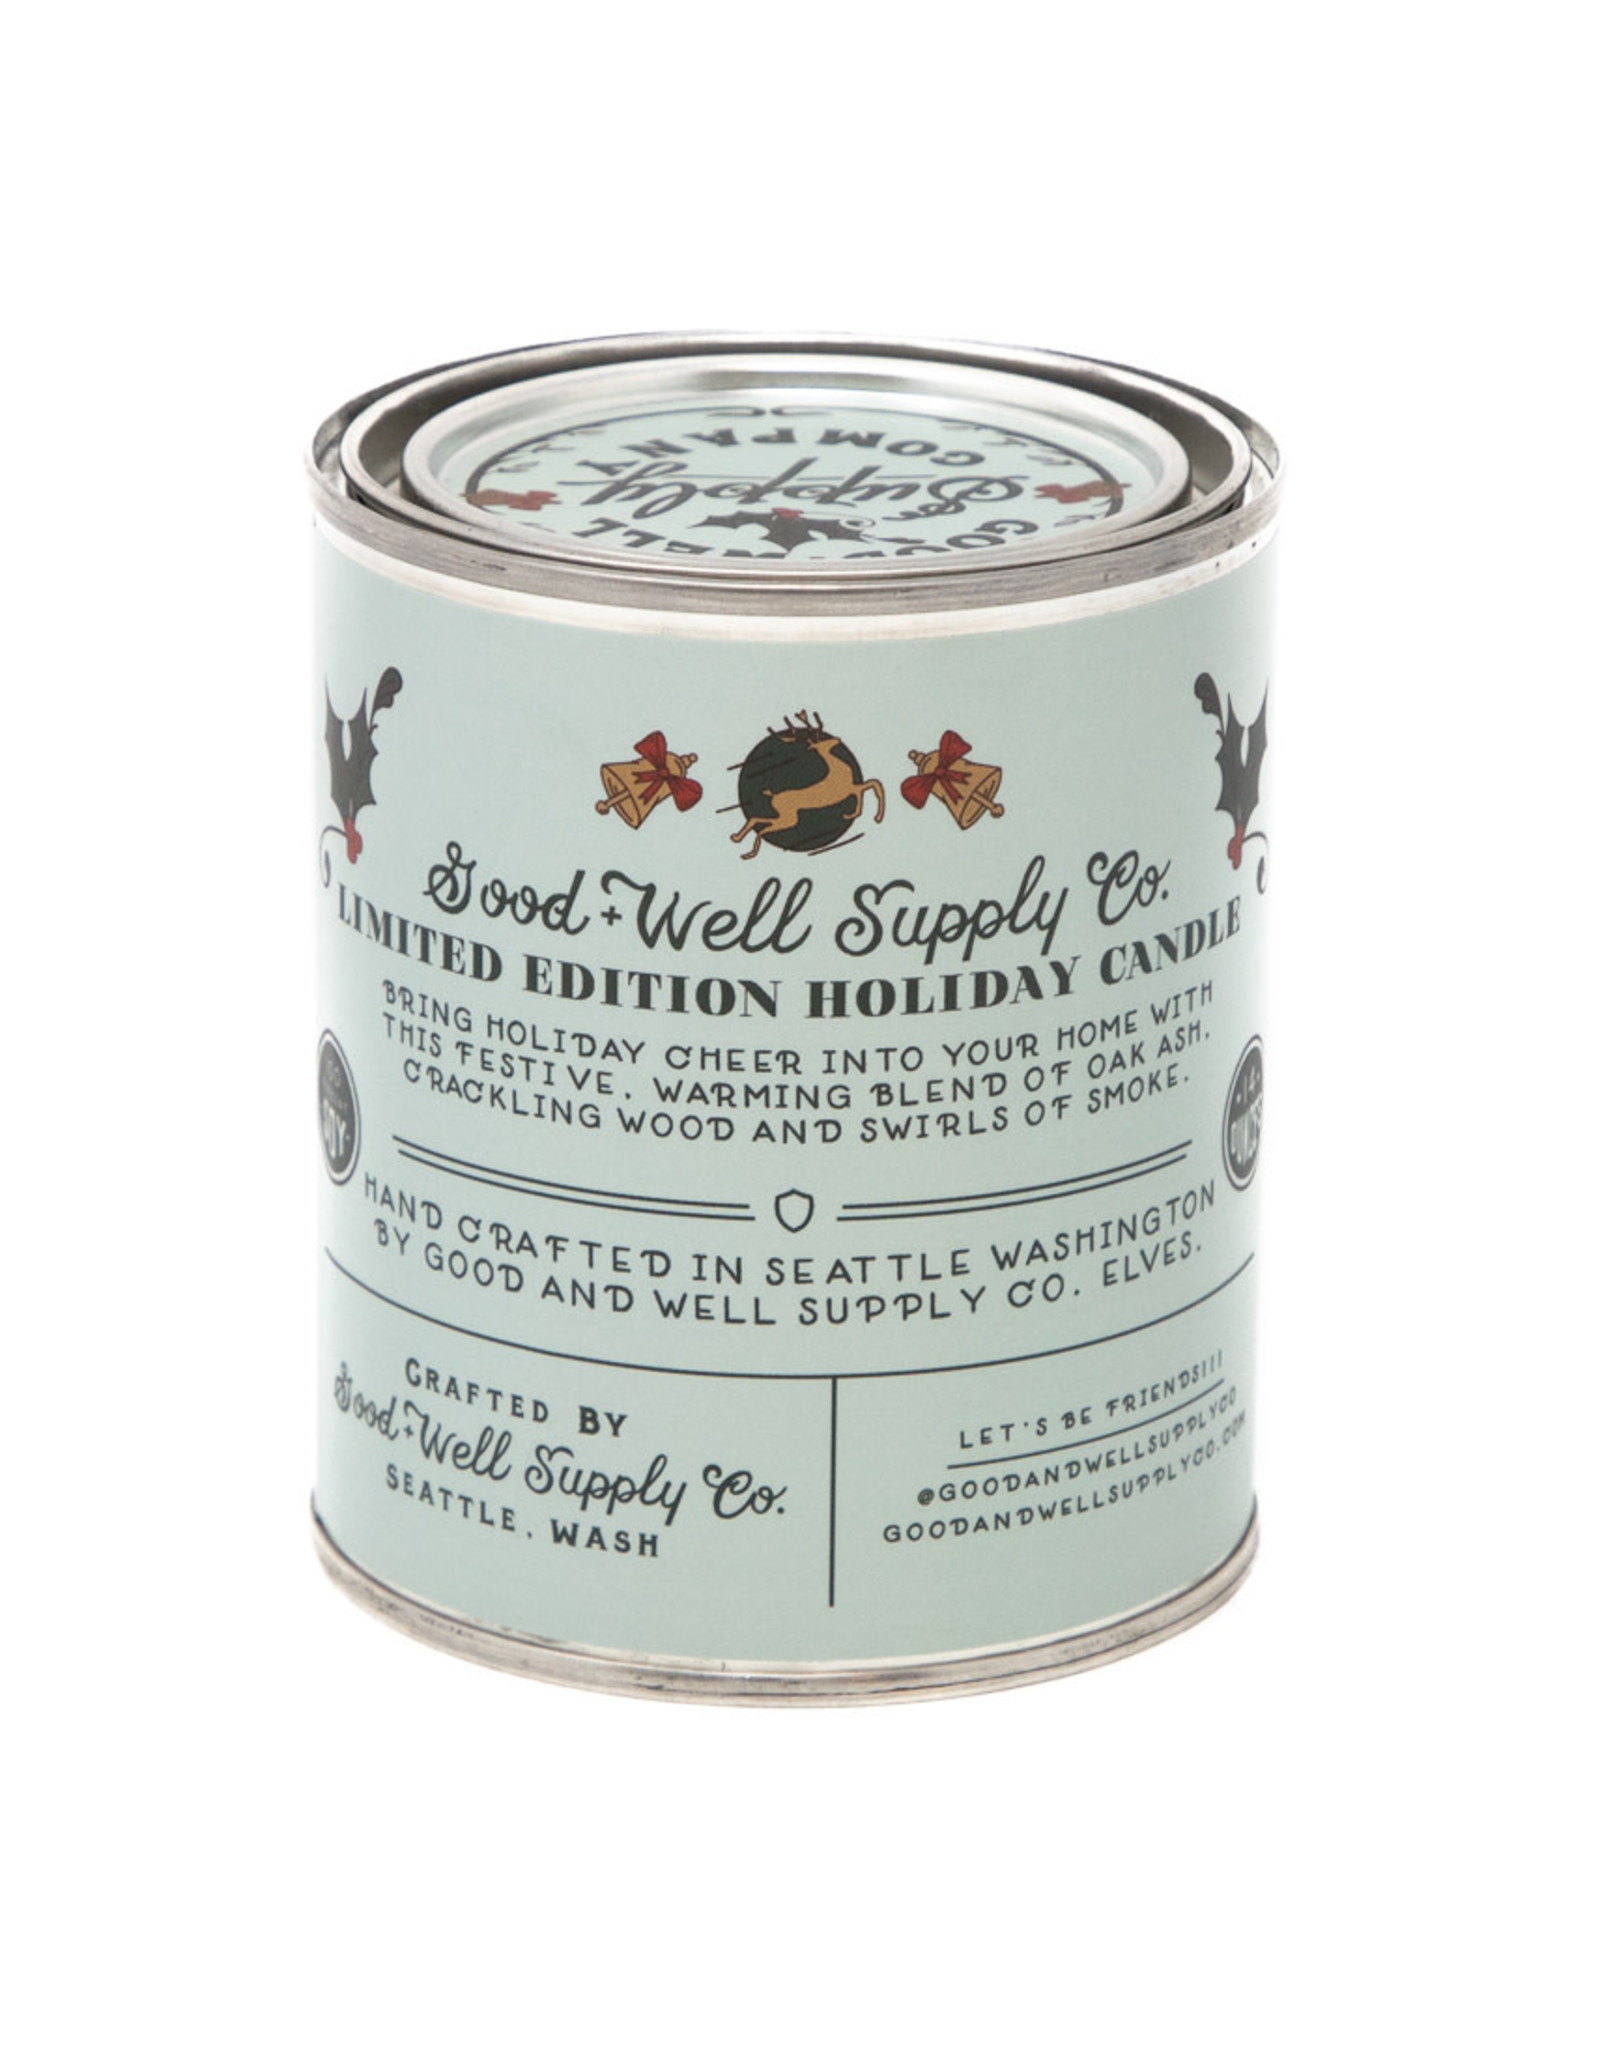 Good & Well Supply Co. Pint Joyous Yule Holiday Candle